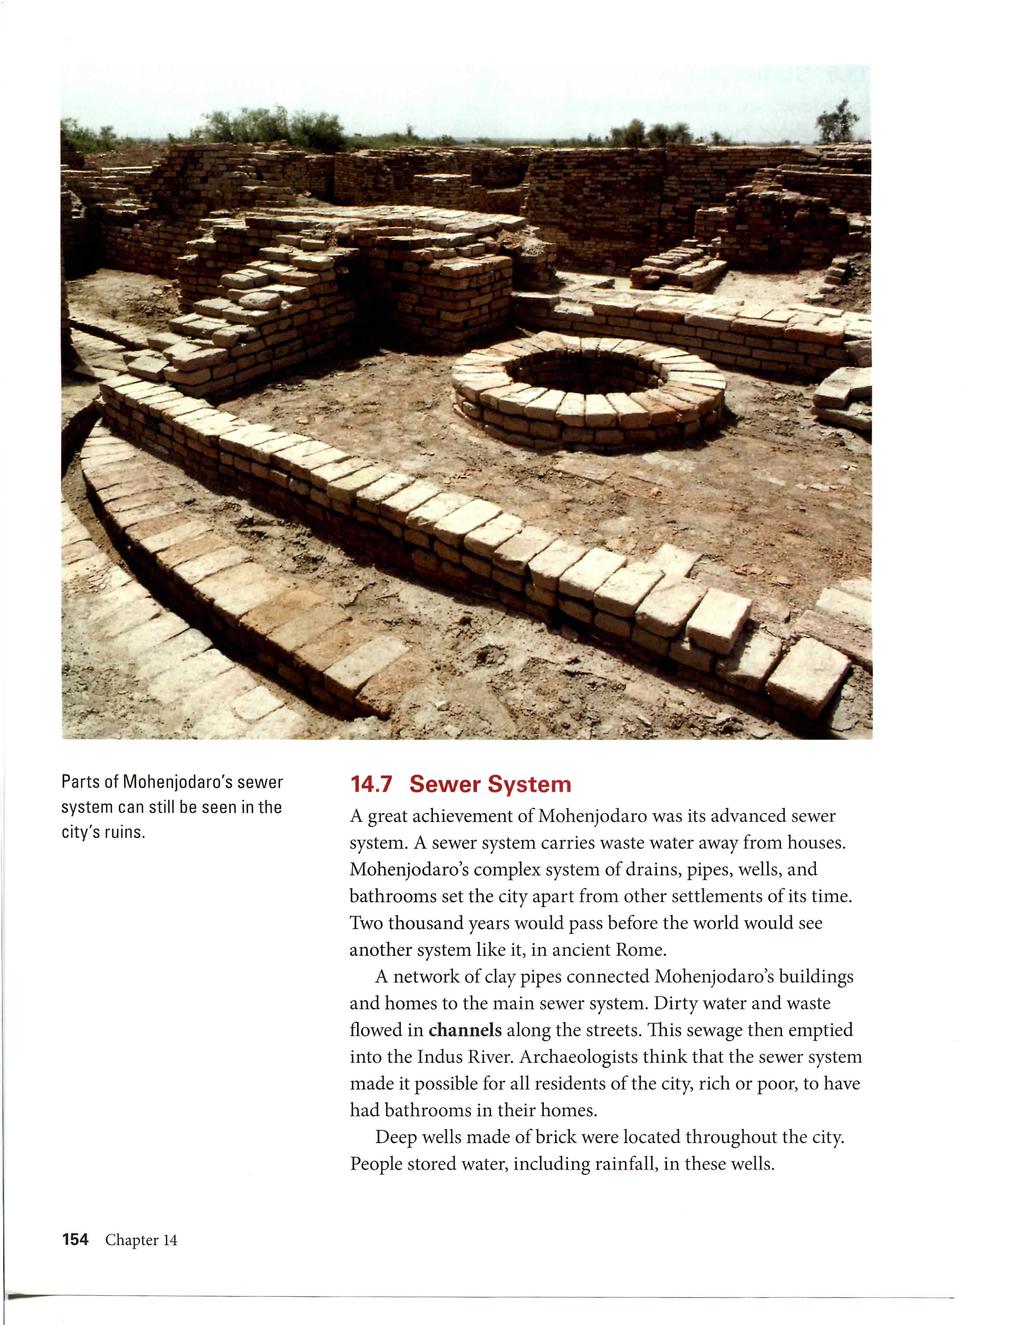 Parts of Mohenjodaro's sewer system can still be seen in the city's ruins. 14.7 Sewer System A great achievement of Mohenjodaro was its advanced sewer system.